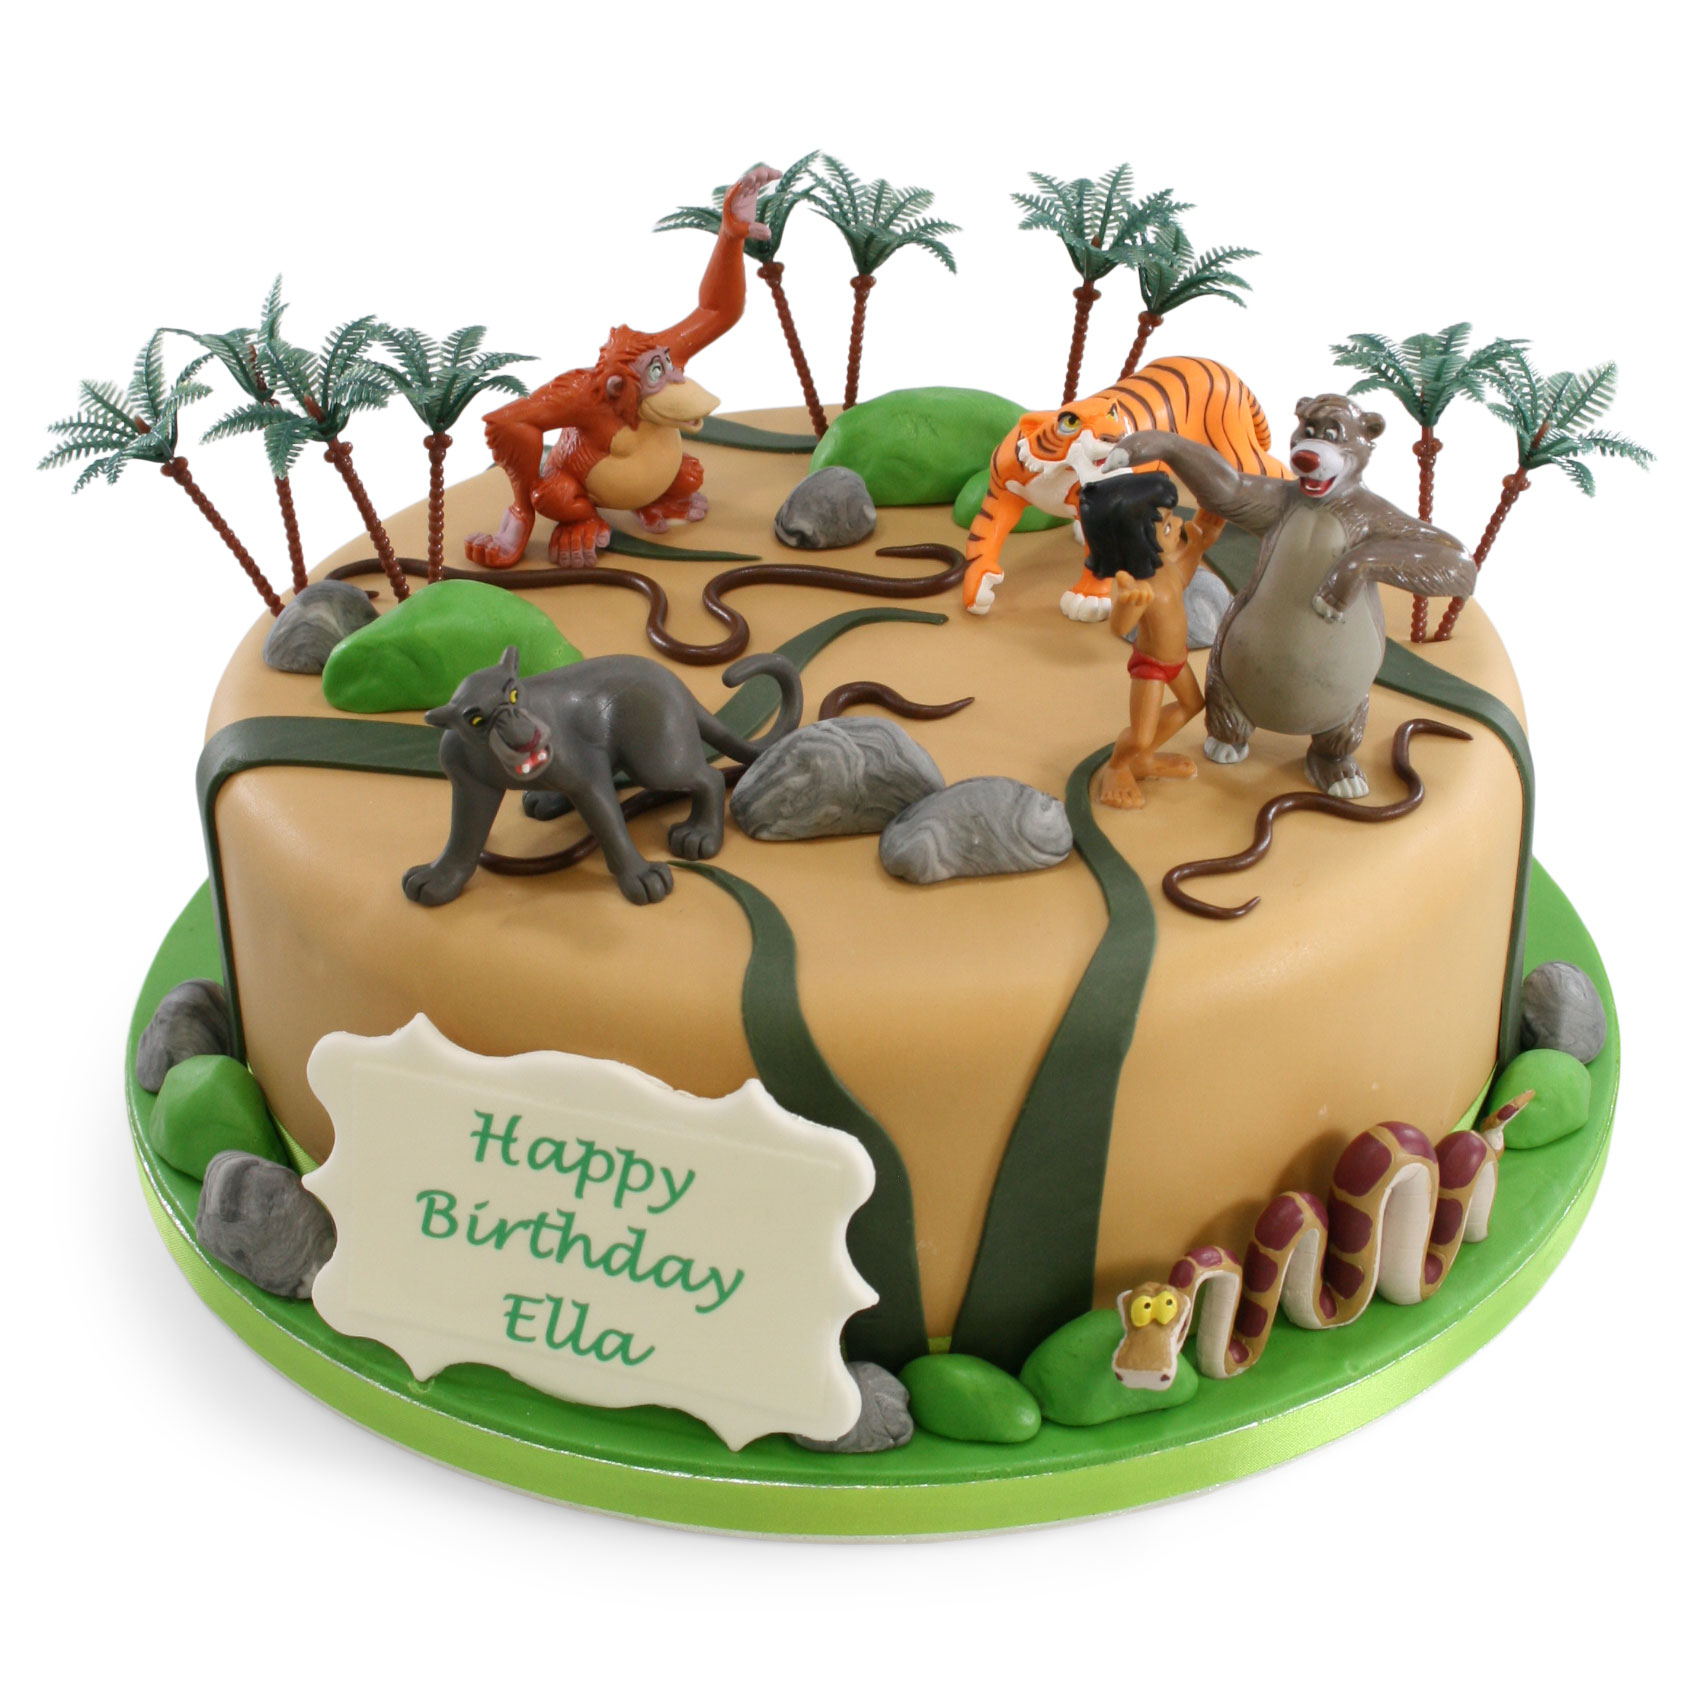 Madagascar Birthday Cake Ideas Images (Pictures)